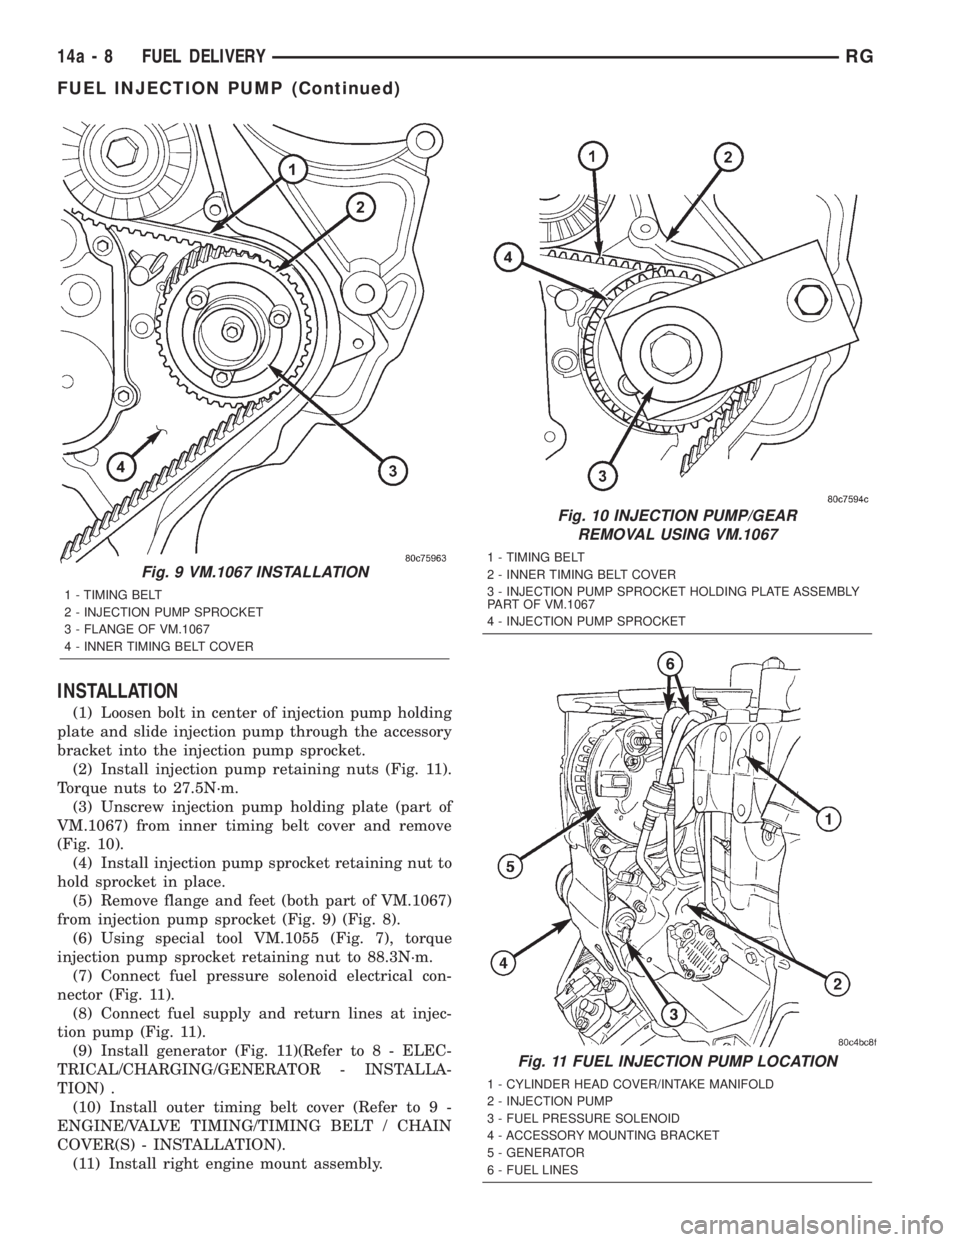 CHRYSLER VOYAGER 2001  Service Manual INSTALLATION
(1) Loosen bolt in center of injection pump holding
plate and slide injection pump through the accessory
bracket into the injection pump sprocket.
(2) Install injection pump retaining nut